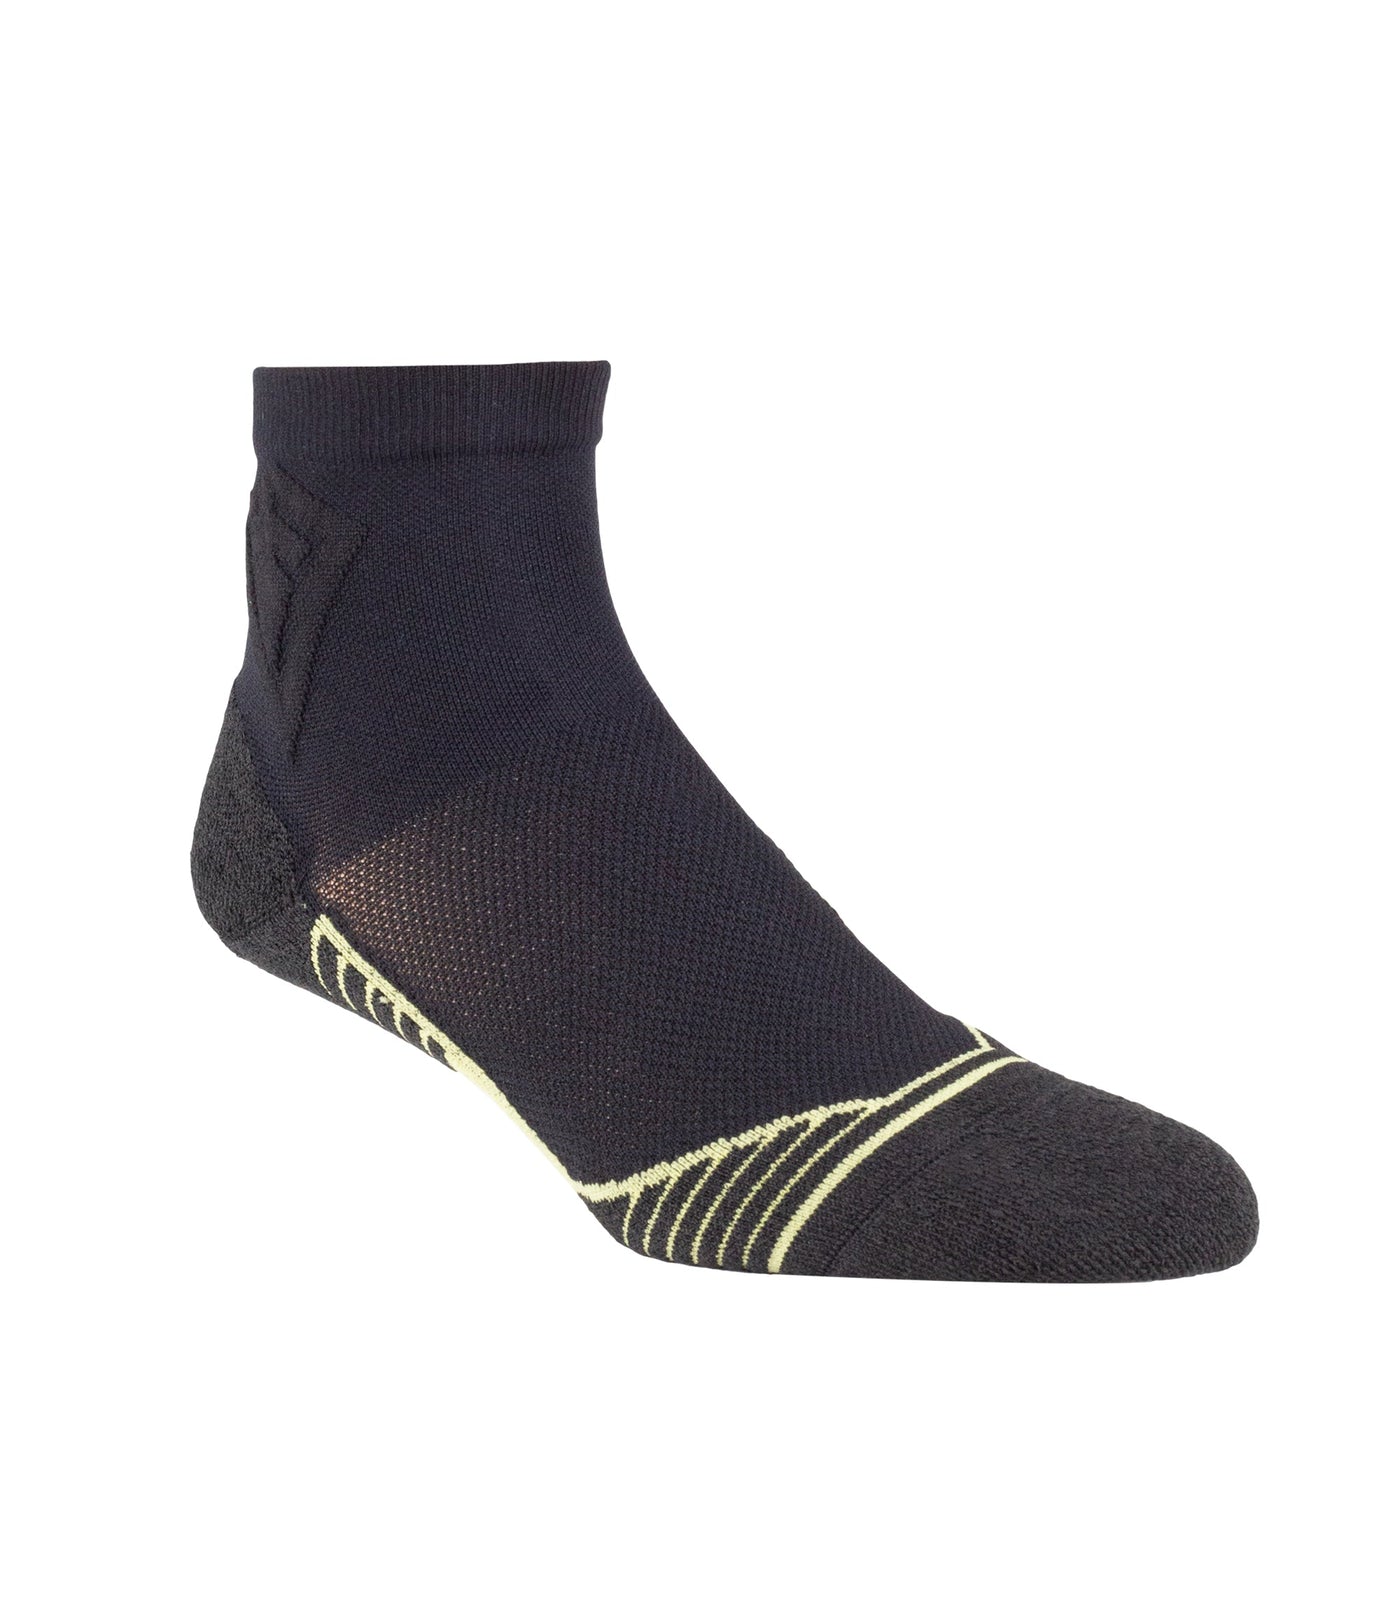 Front of Advanced Fit Low Cut Sock in Black